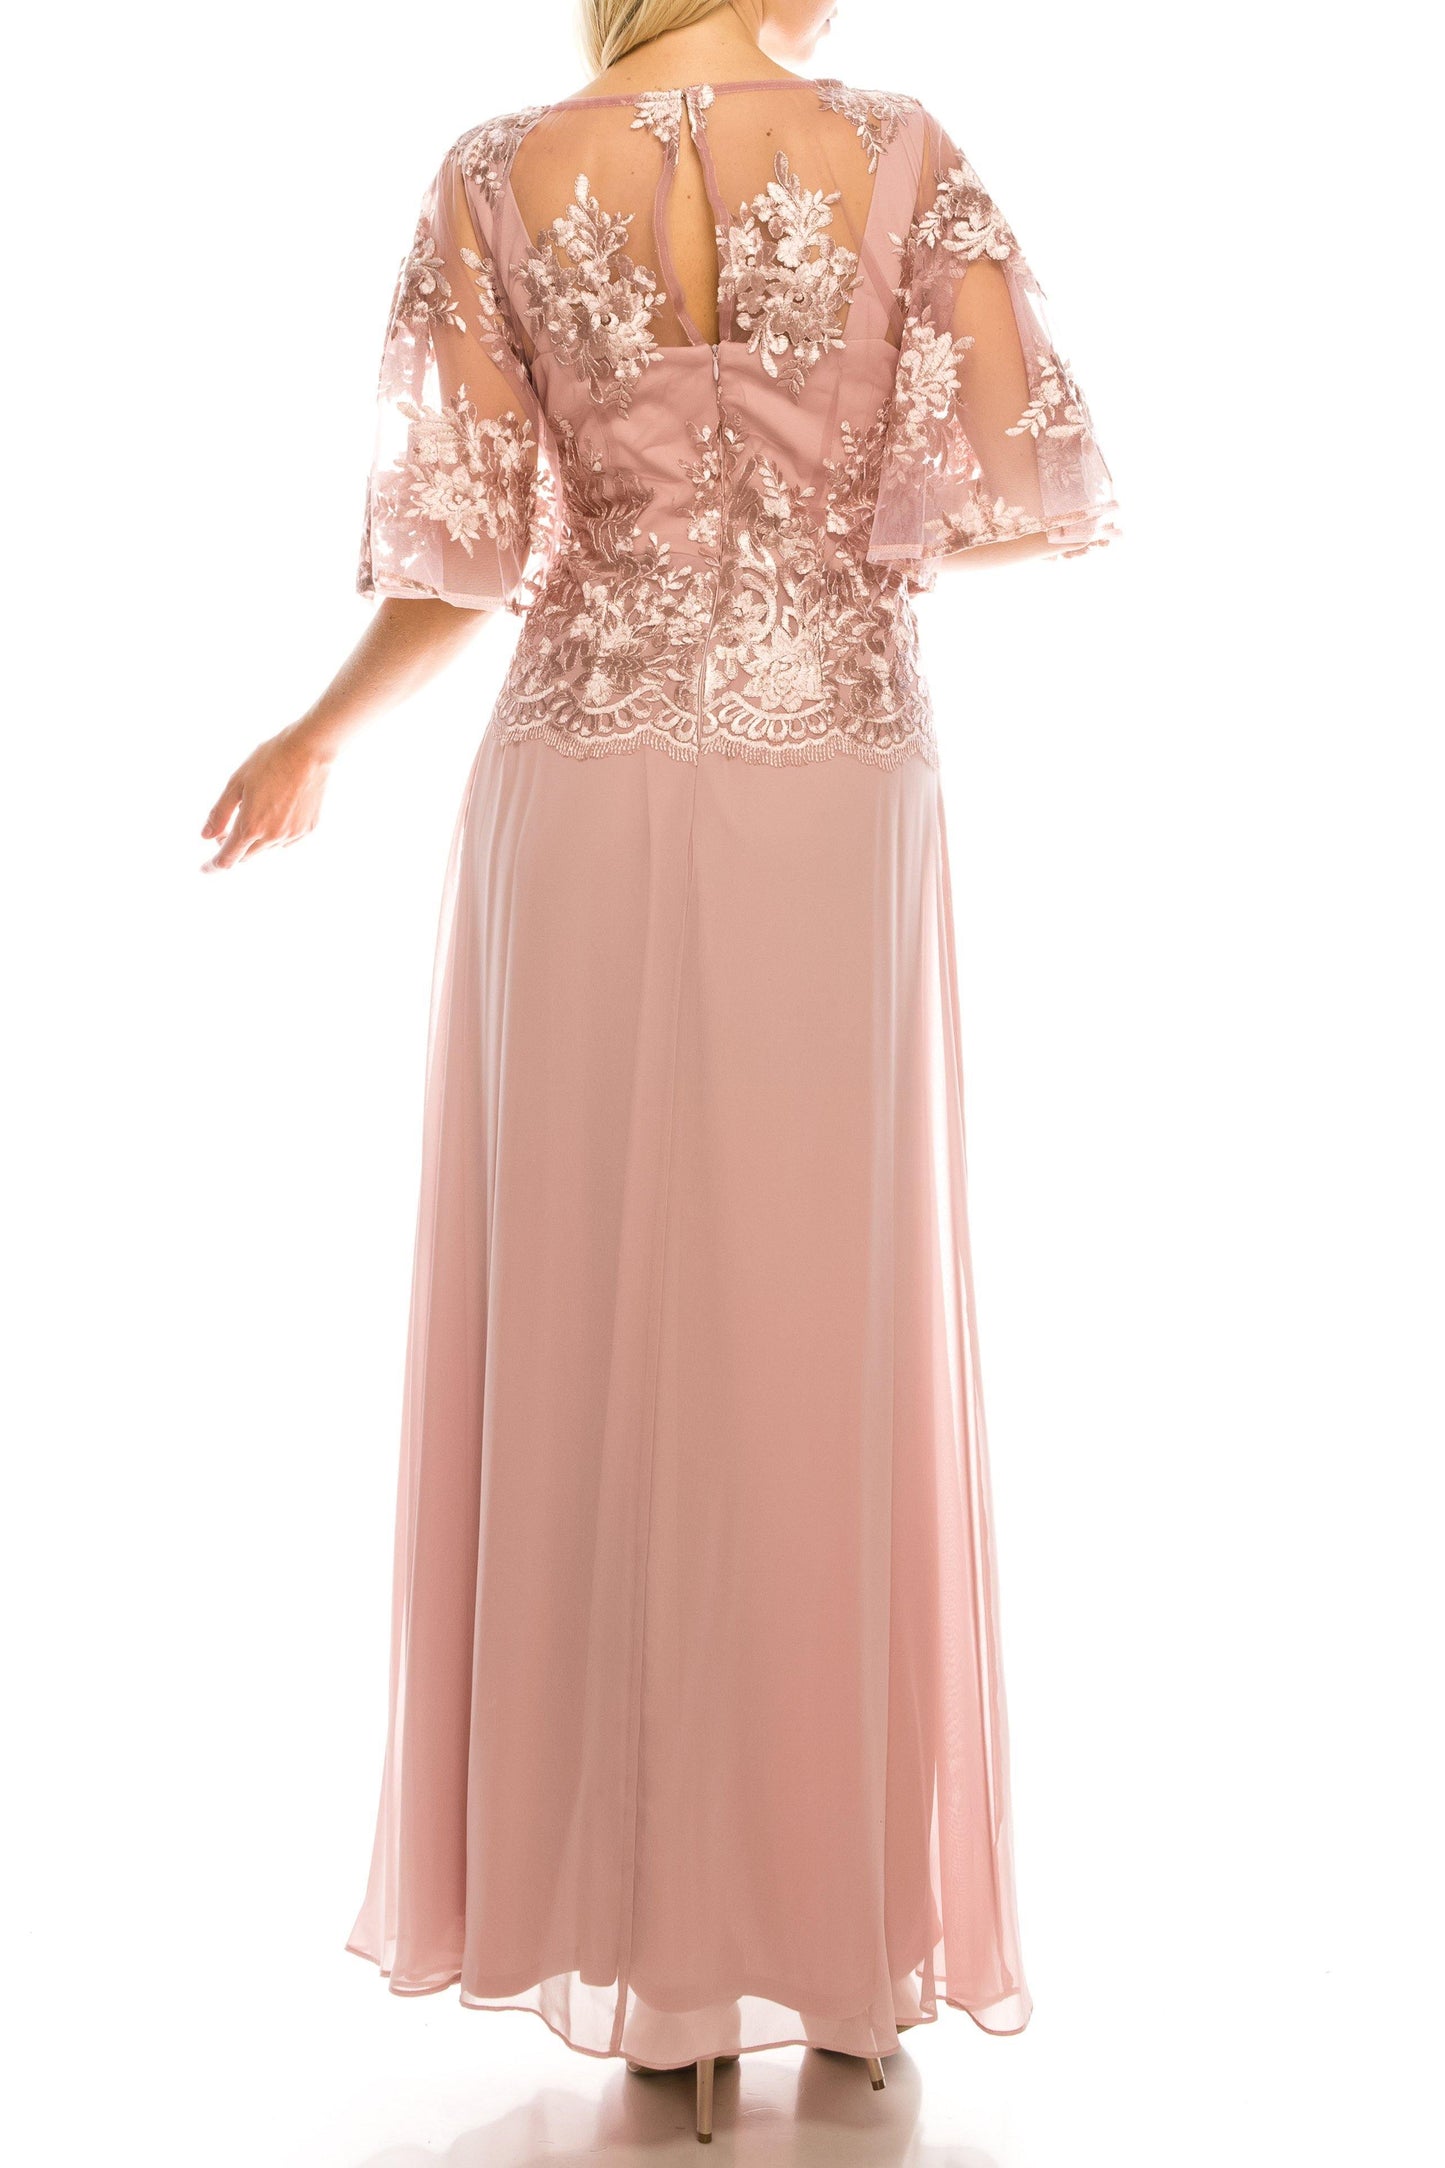 Le Bos Rose Long Formal Mother of the Bride Dress - The Dress Outlet